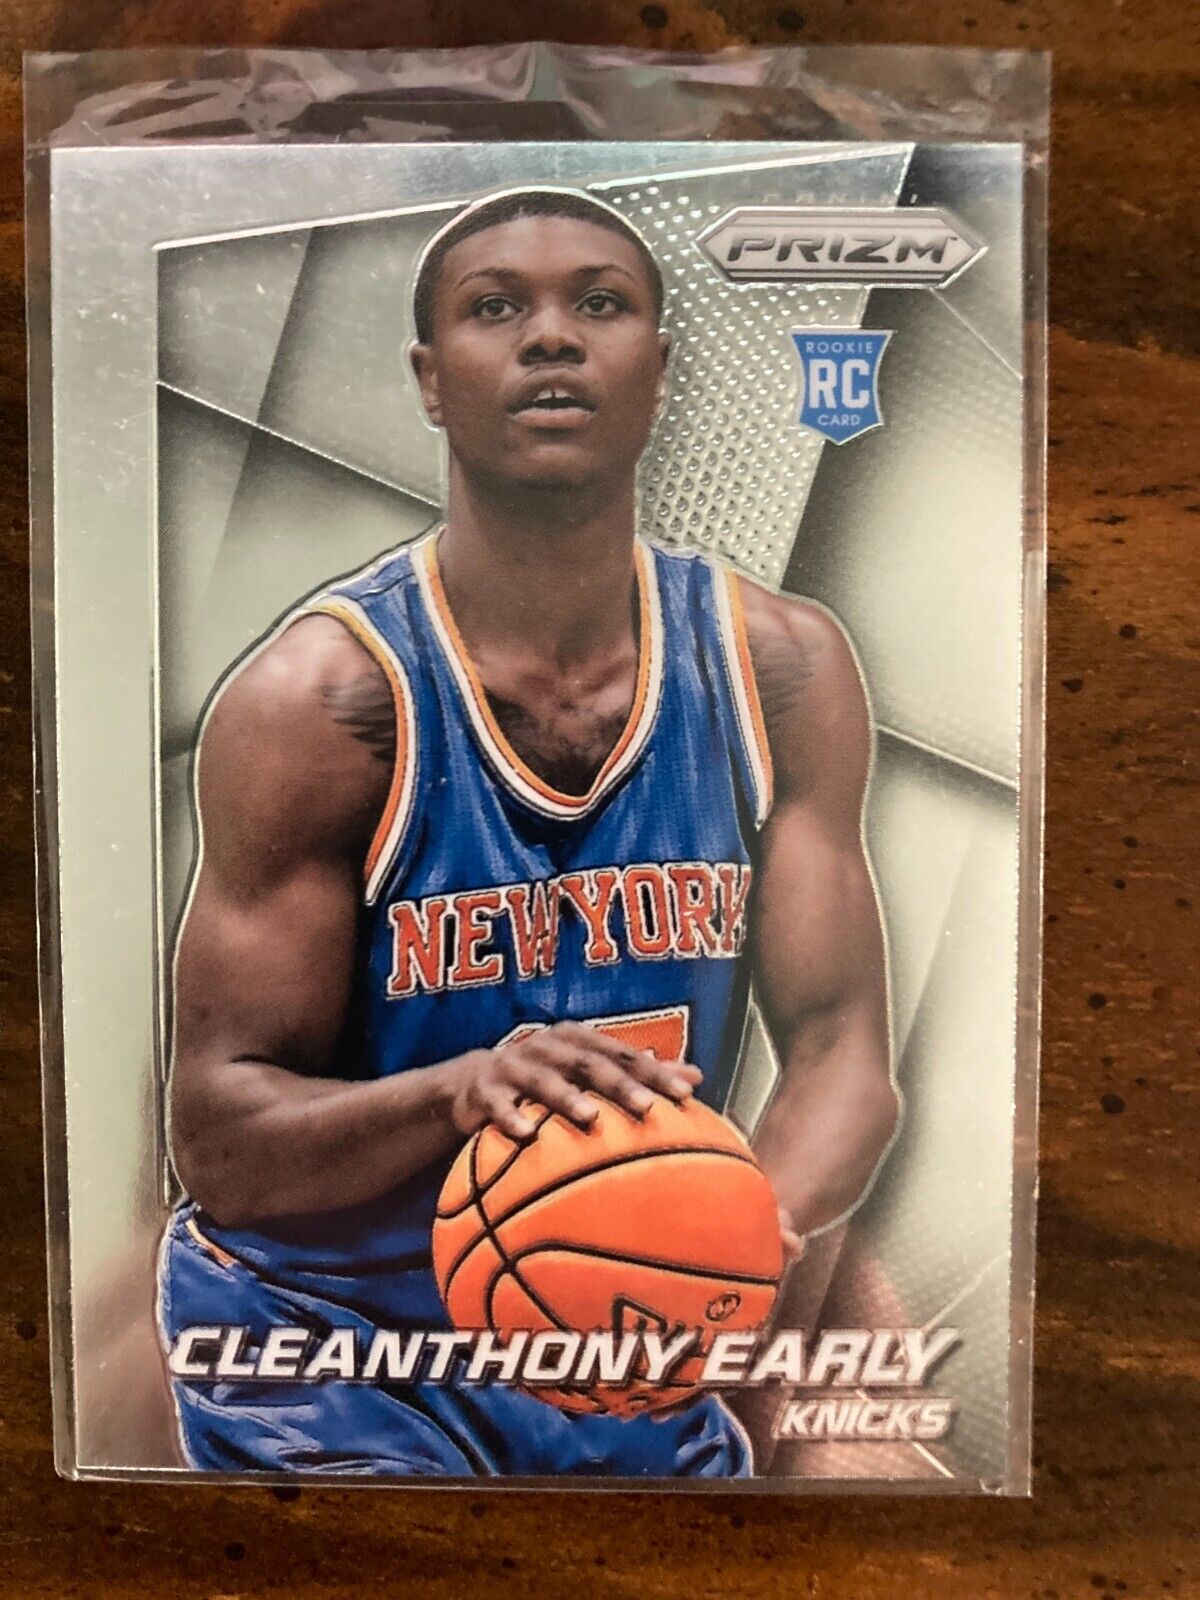 2014-15 Panini Prizm Cleanthony Early Rookie Card #277 New York Knicks RC. rookie card picture